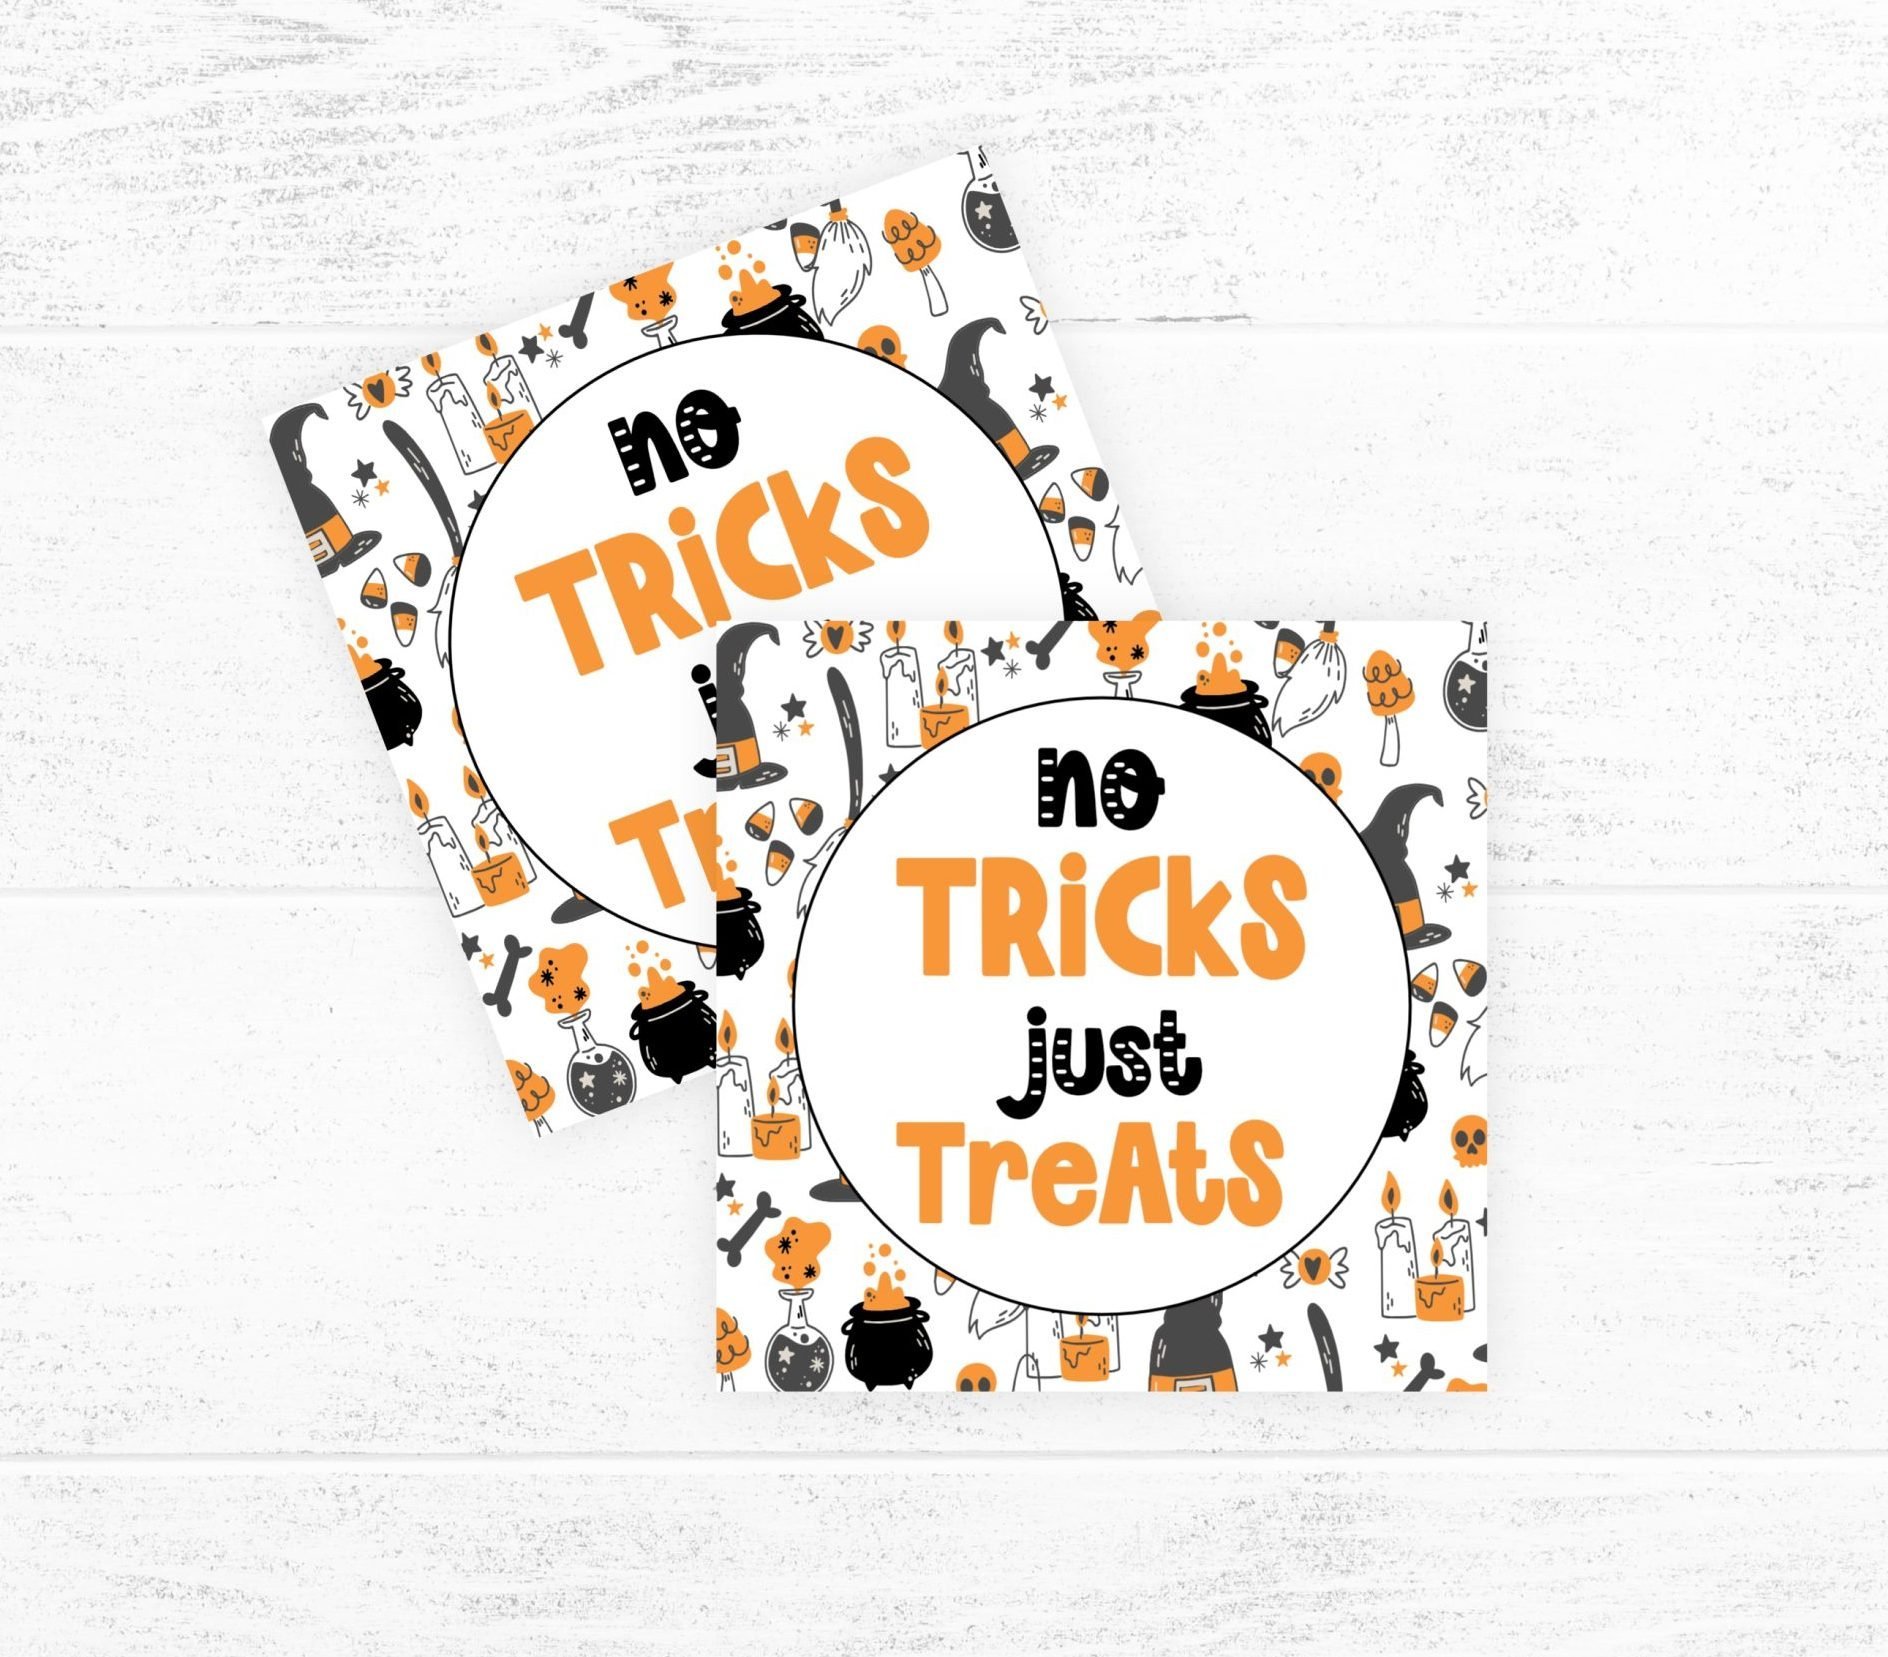 Gift Tags | Favor Tags Halloween No Tricks Just Treats Cookie Tag – Printable Favor Tag for Halloween Parties and Trick-or-Treaters Halloween classroom gift tag